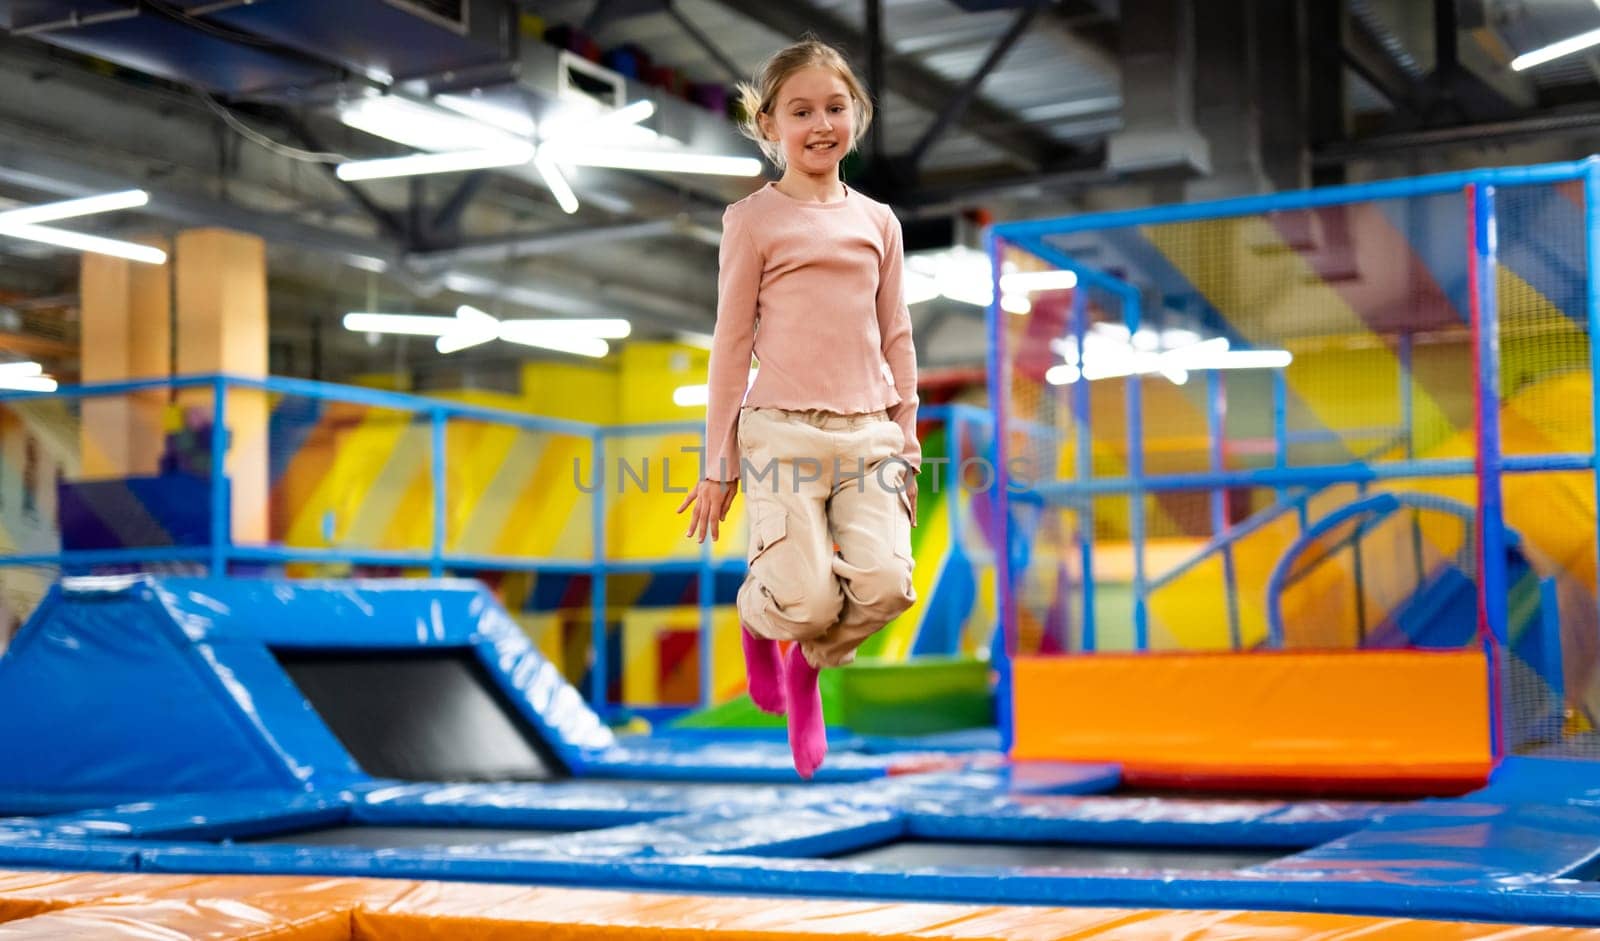 Pretty girl kid jumping on colorful trampoline at playground park and smiling. Beautiful preteen child during active entertaiments